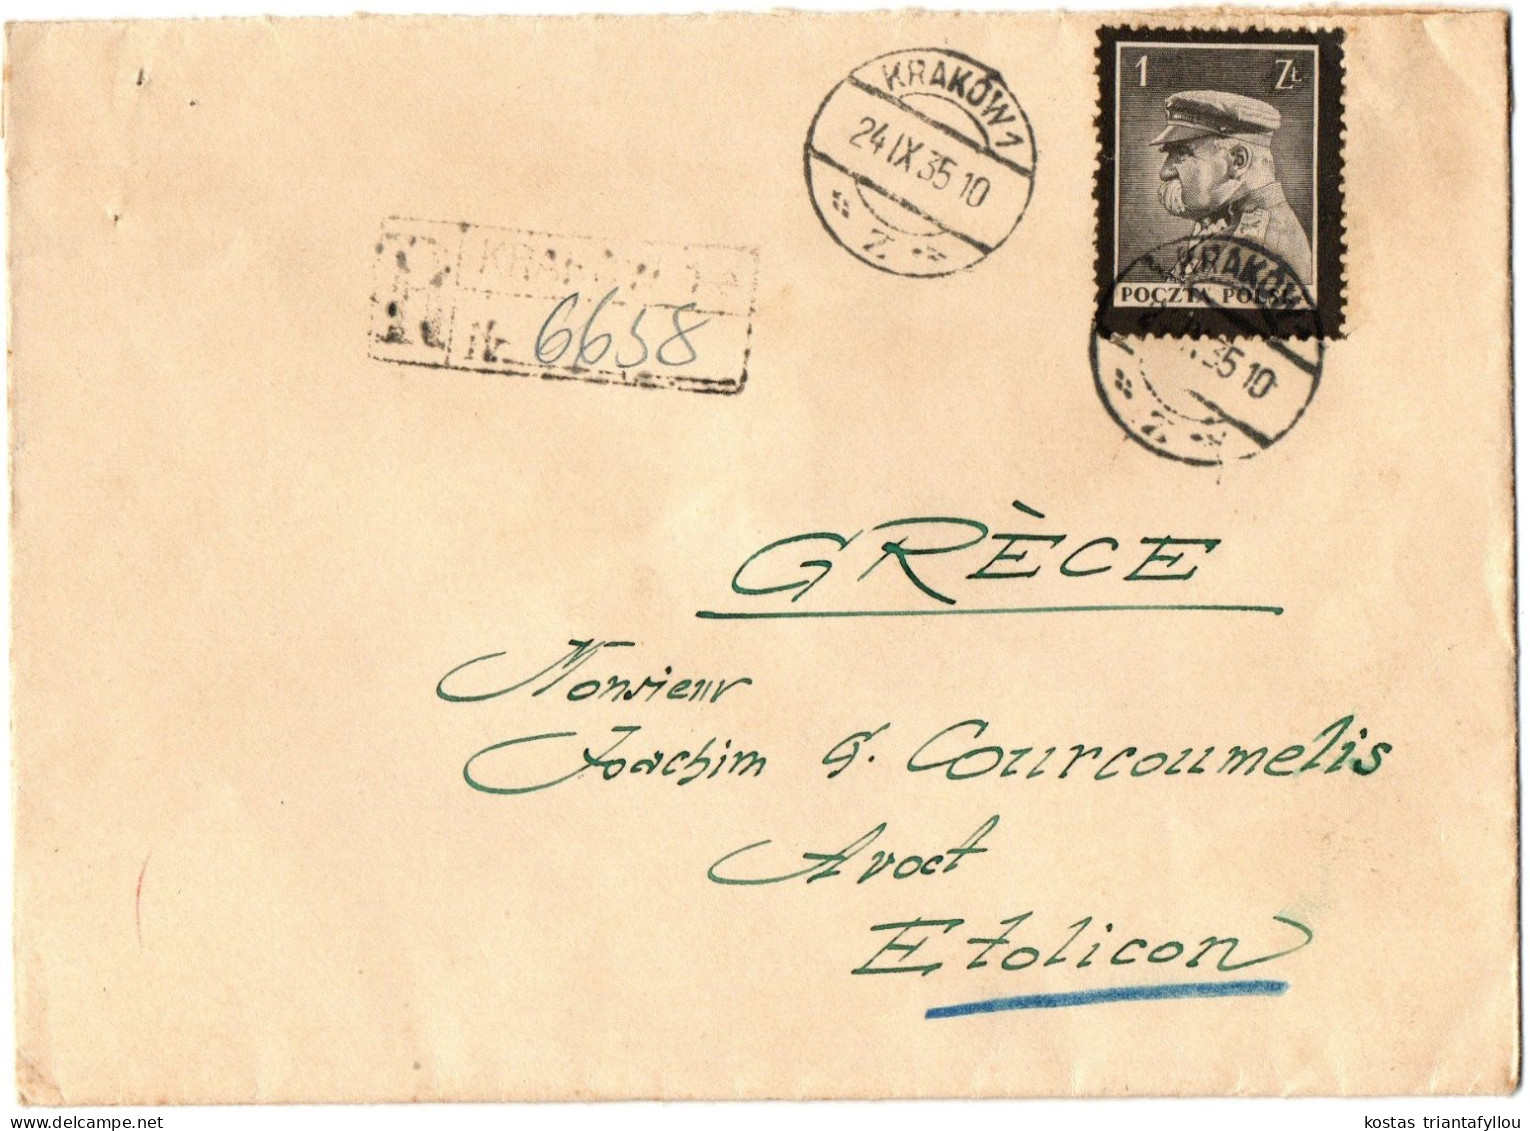 1, 4 POLAND, 1935, COVER TO GREECE - Covers & Documents